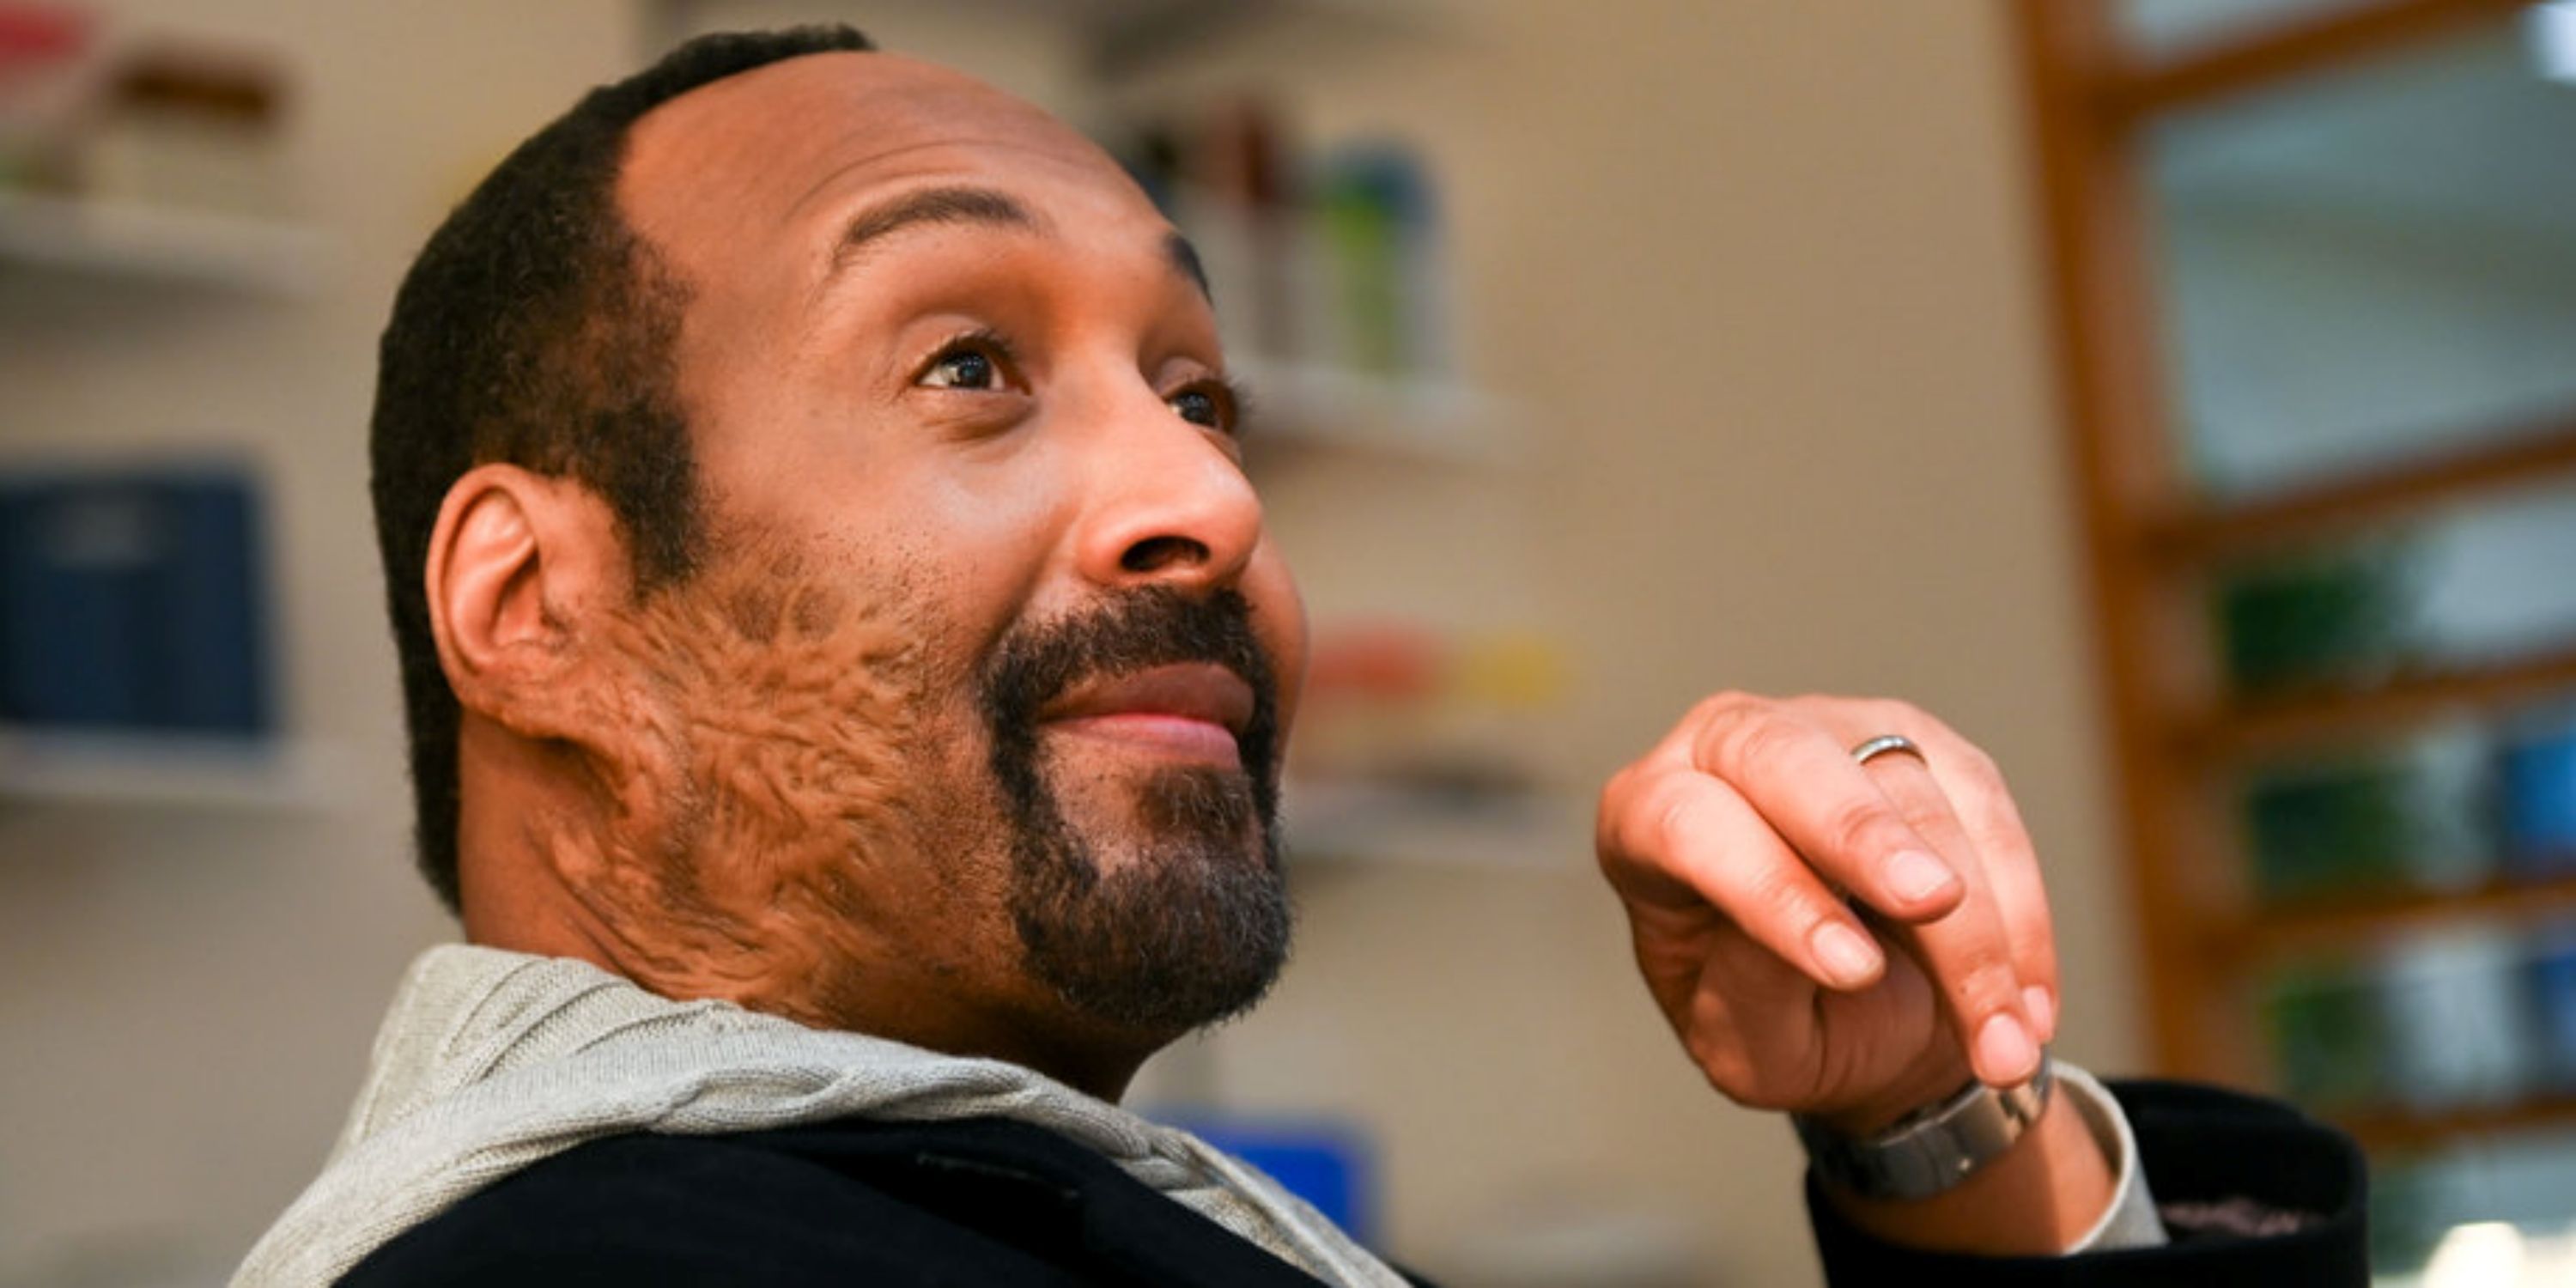 Jesse L. Martin as Alec Mercer in Episode 2 of Season 1 of the NBC series The Irrational